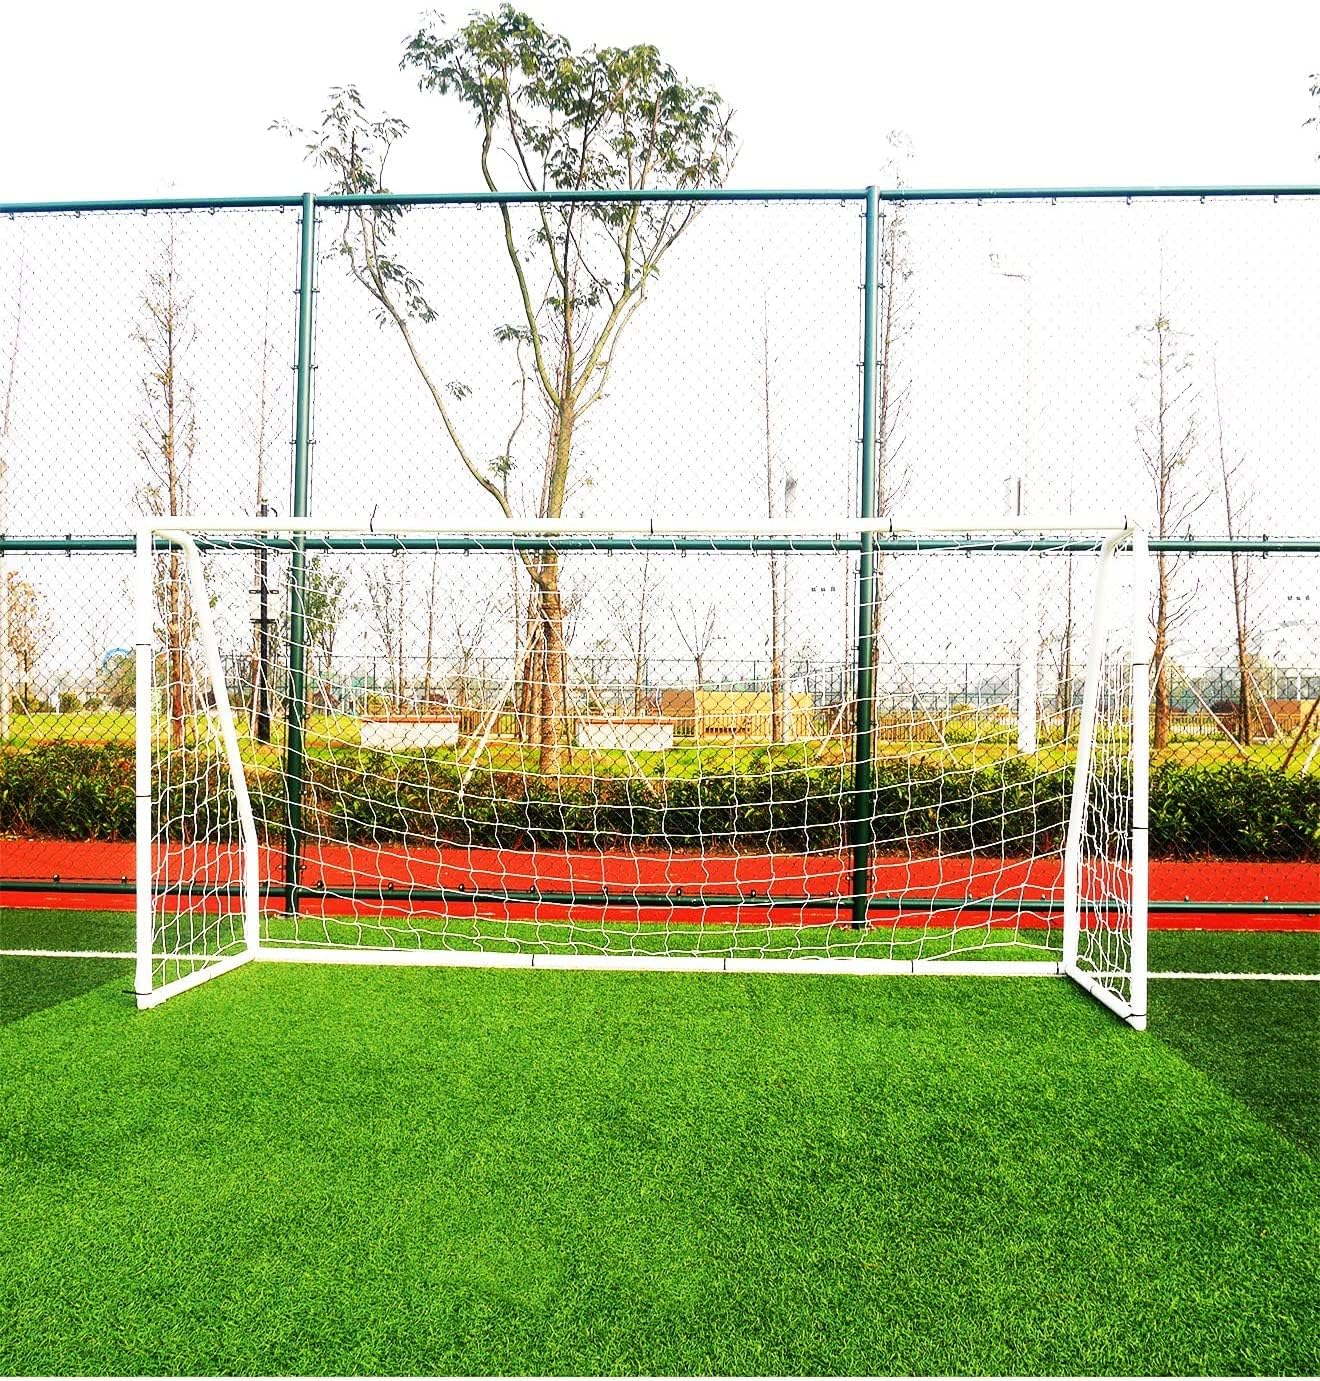 Premium Football Steel Goals for Kids Playing & Club Players